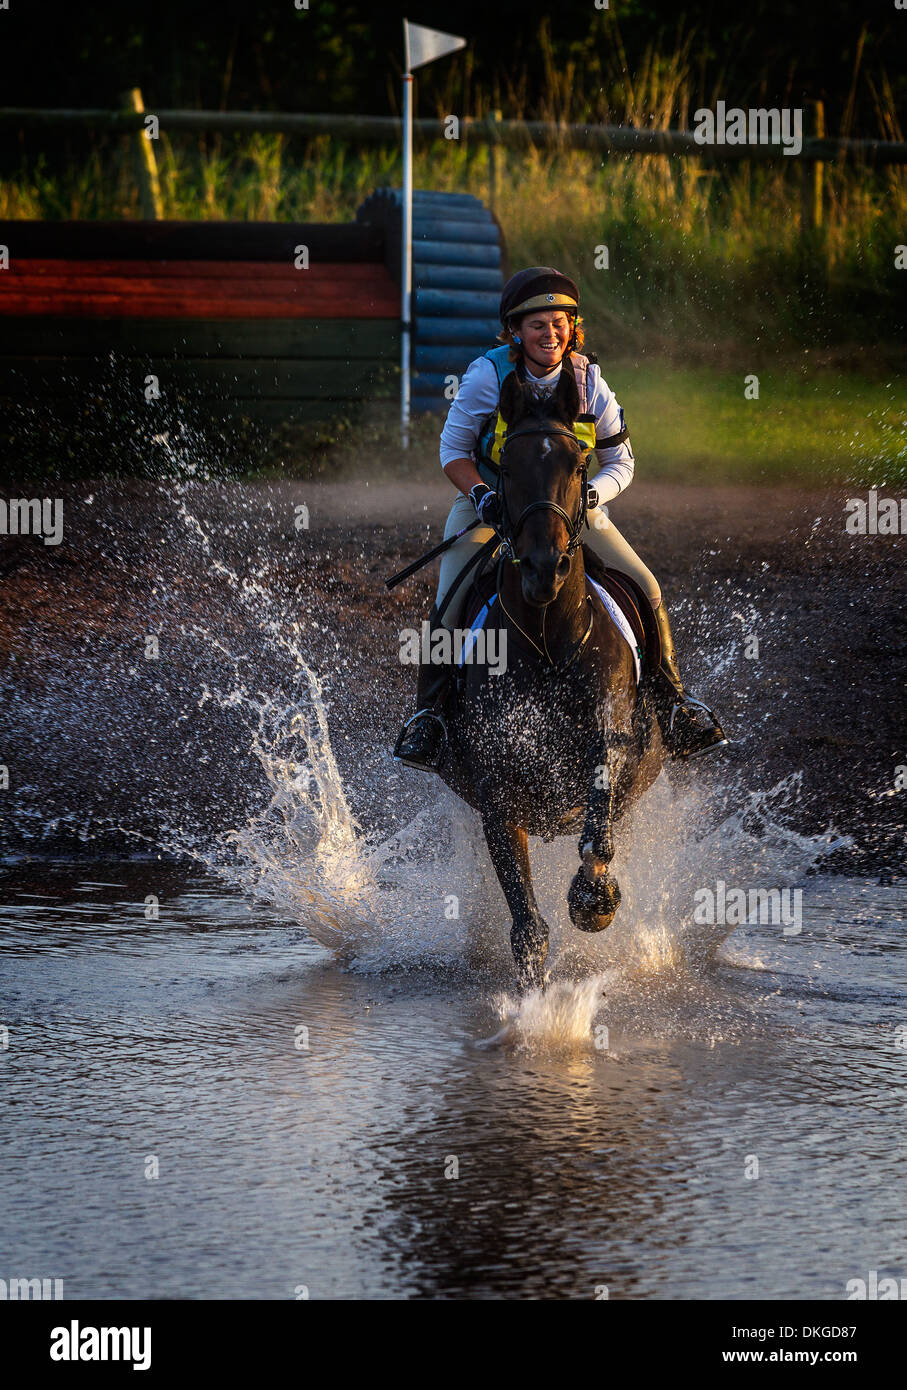 Reiter Wettbewerb in cross Country event Stockfoto